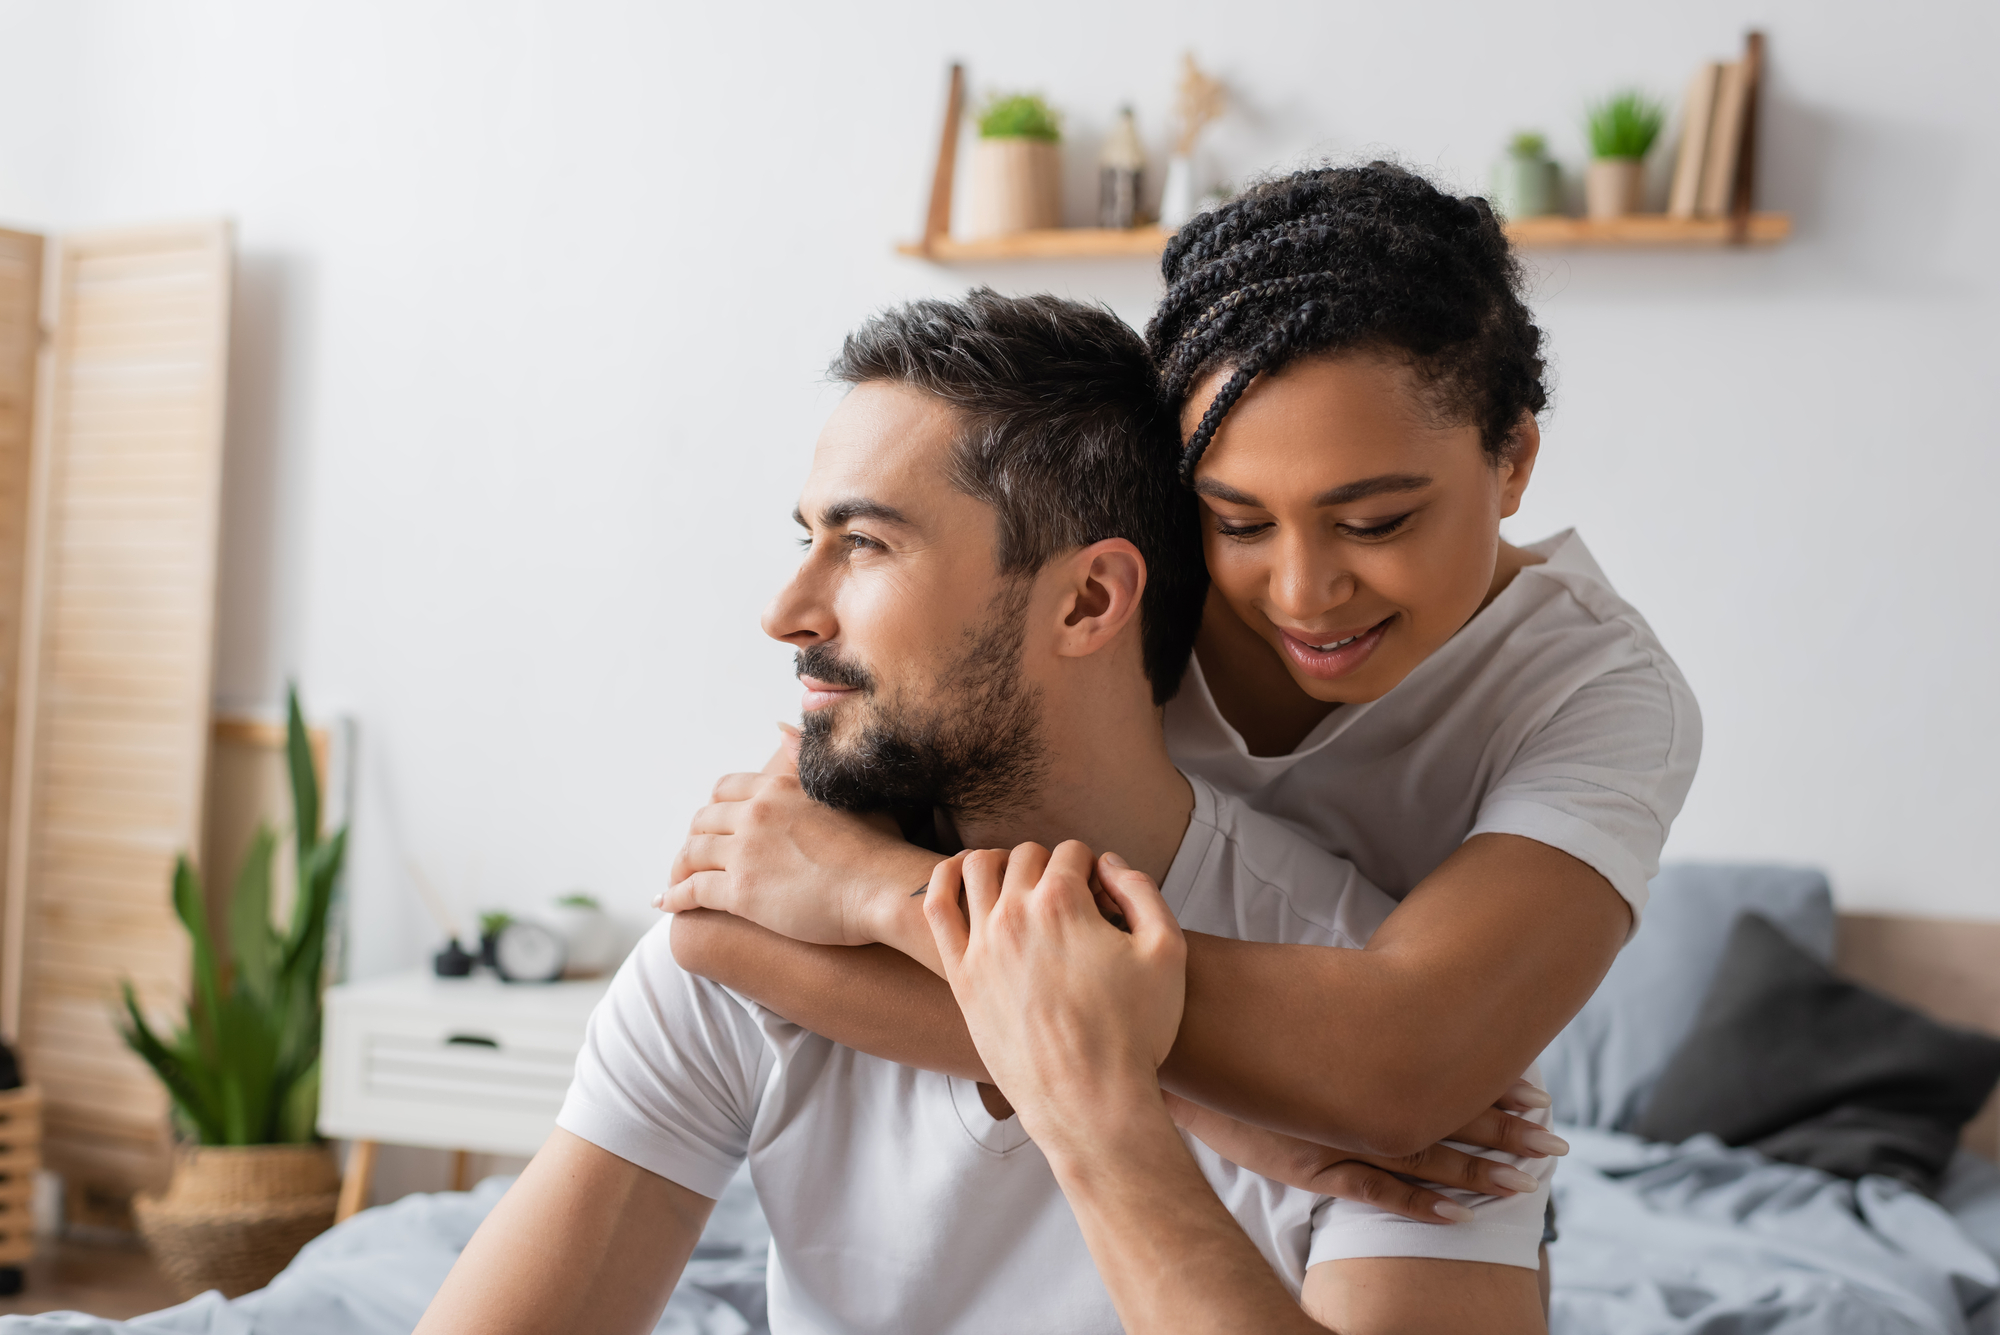 A couple in a cozy bedroom smiles and embraces. The woman hugs the man from behind as he looks to the side. Both wear white shirts. The room is decorated with plants, shelves, and neutral-colored furniture, creating a relaxed atmosphere.